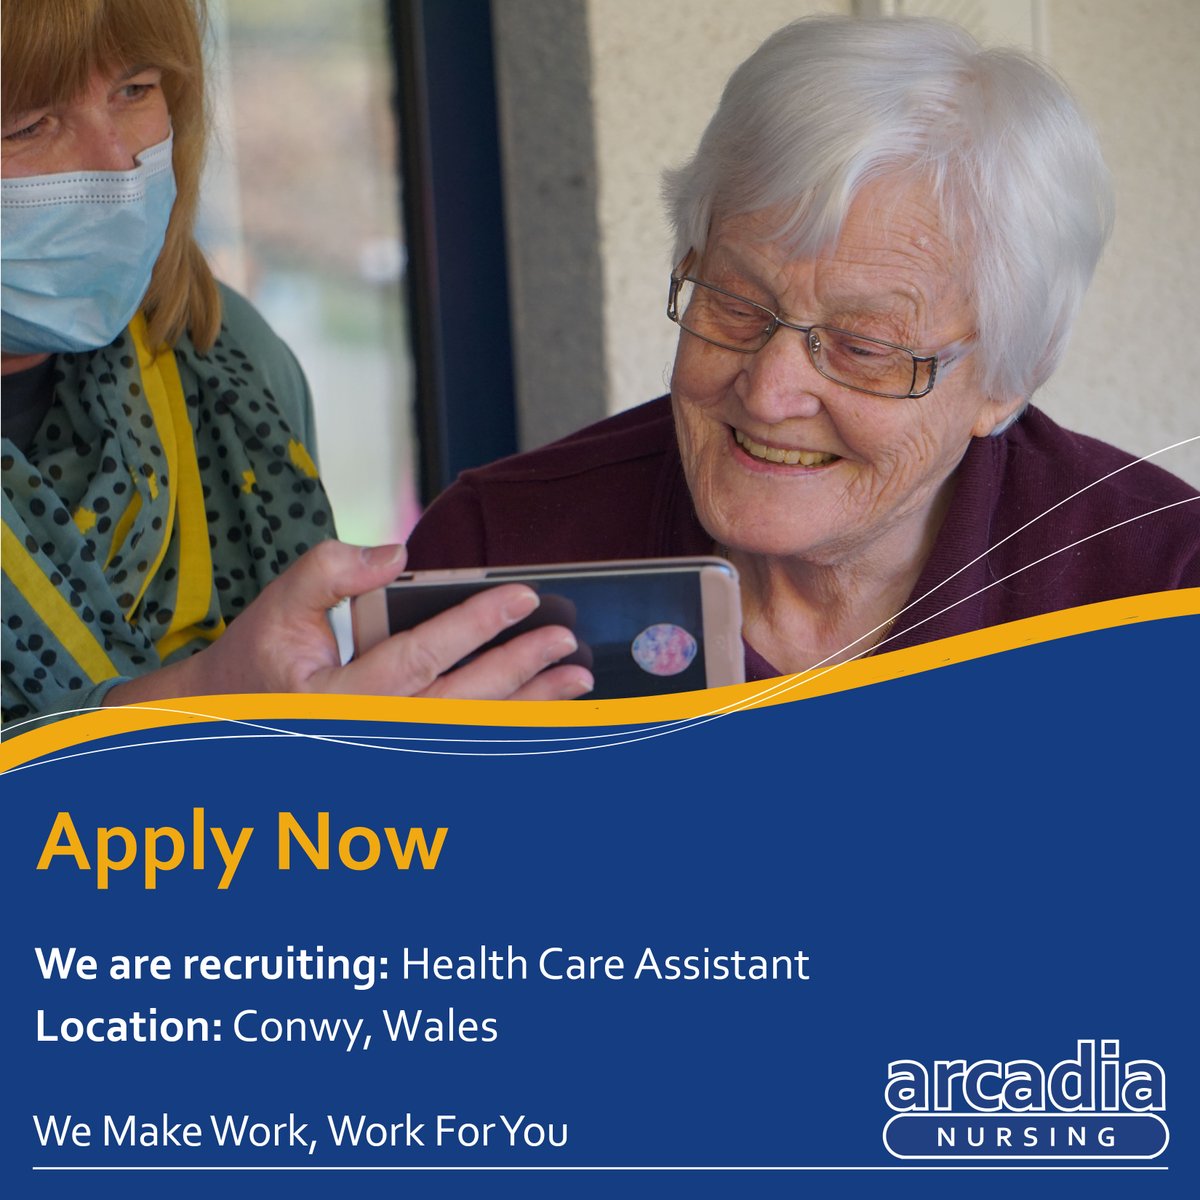 We are recruiting Health Care Assistants in Conwy, Wales.
If you or someone you know would like to apply for this role, you can apply here: arcadianursing.co.uk/register-with-…

#healthcareworker #healthcareassistant #healthcare #carers #carework